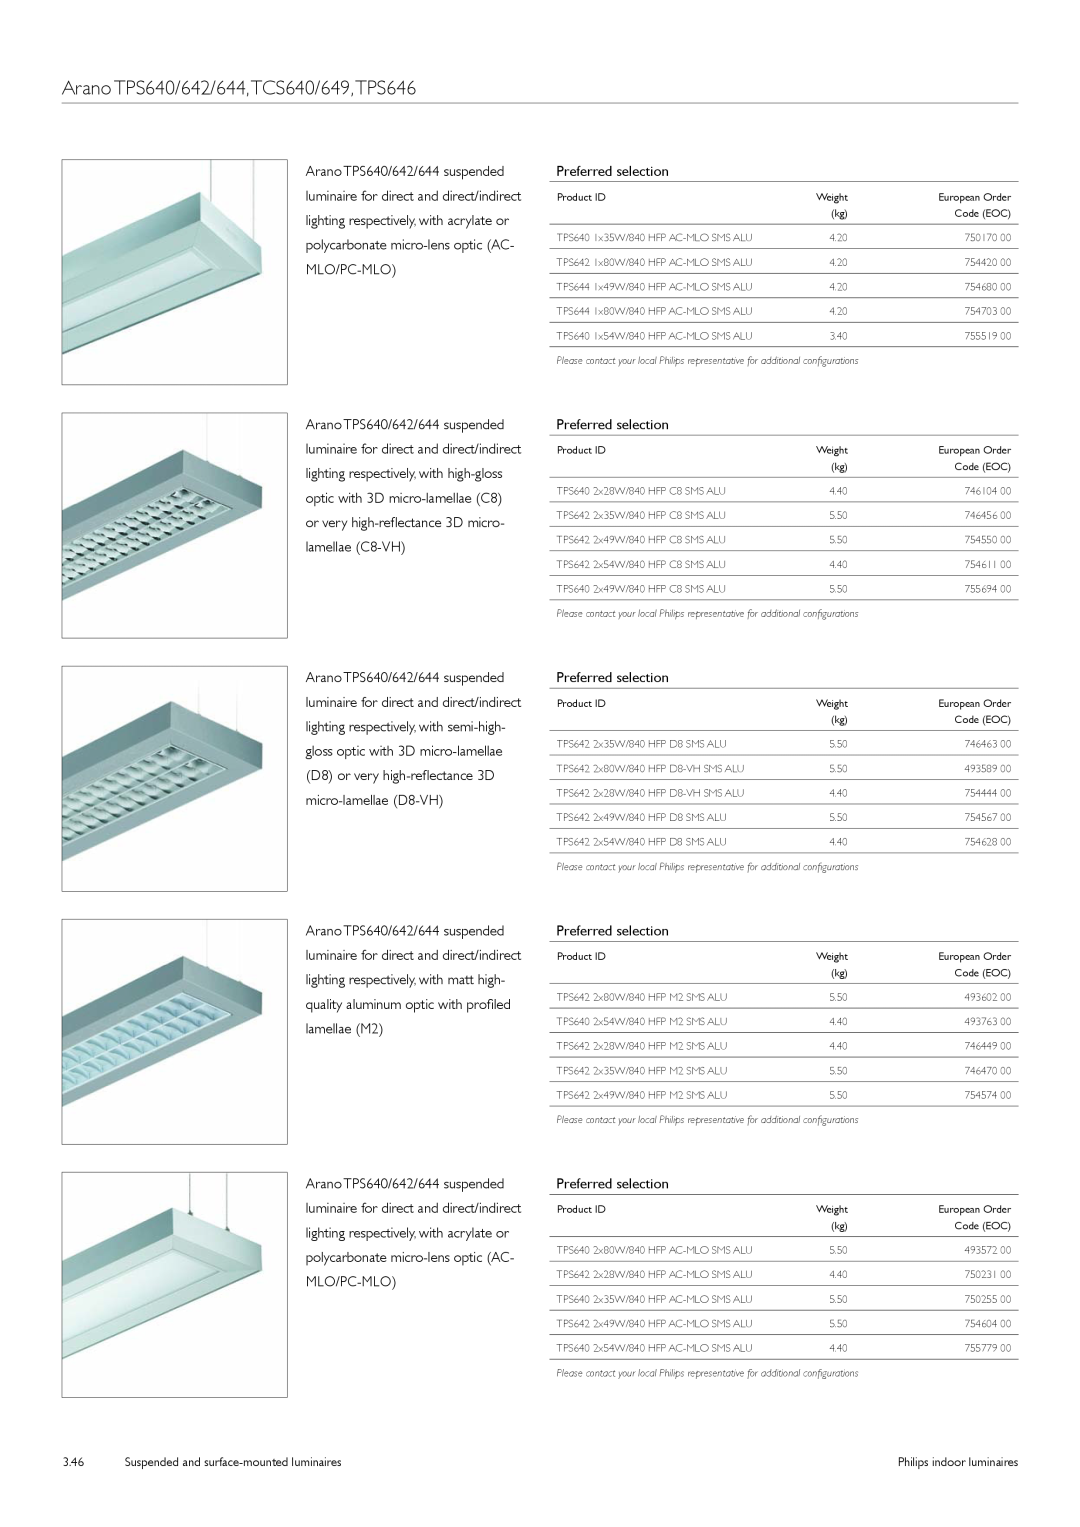 Philips TCS125 manual Arano TPS640/642/644,TCS640/649,TPS646, Suspended and surface-mountedluminaires 